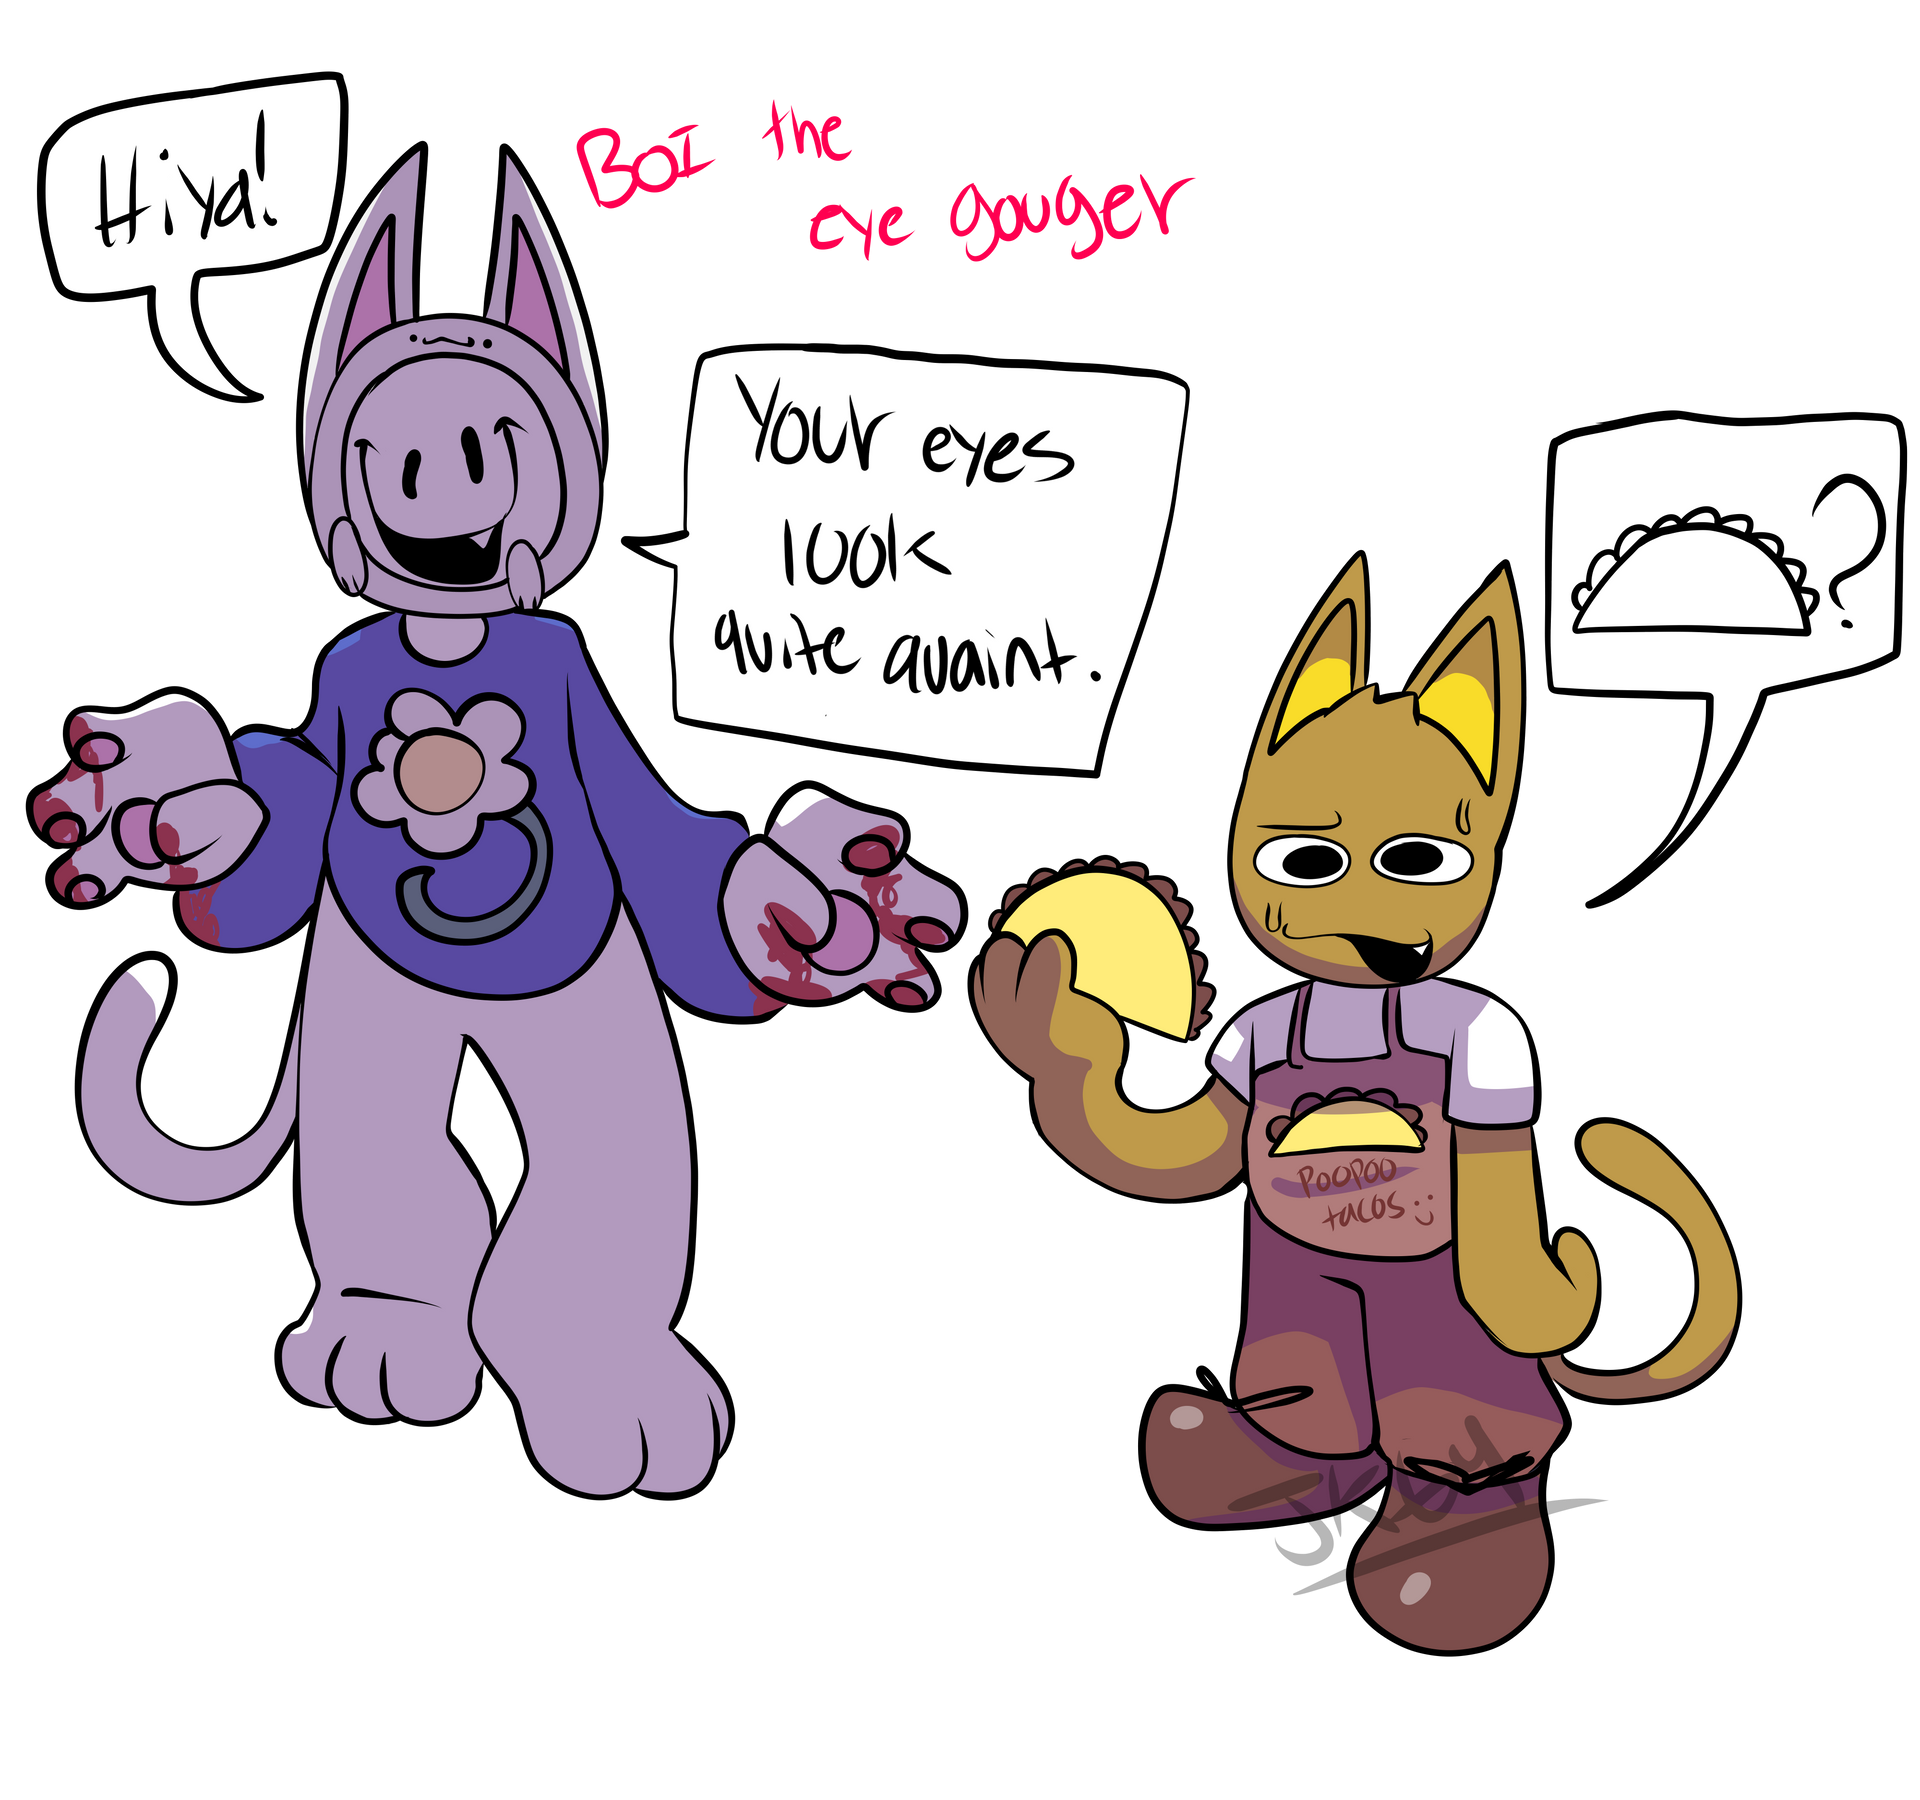 Poopoo and Boi Swapped by JayKay64 on DeviantArt